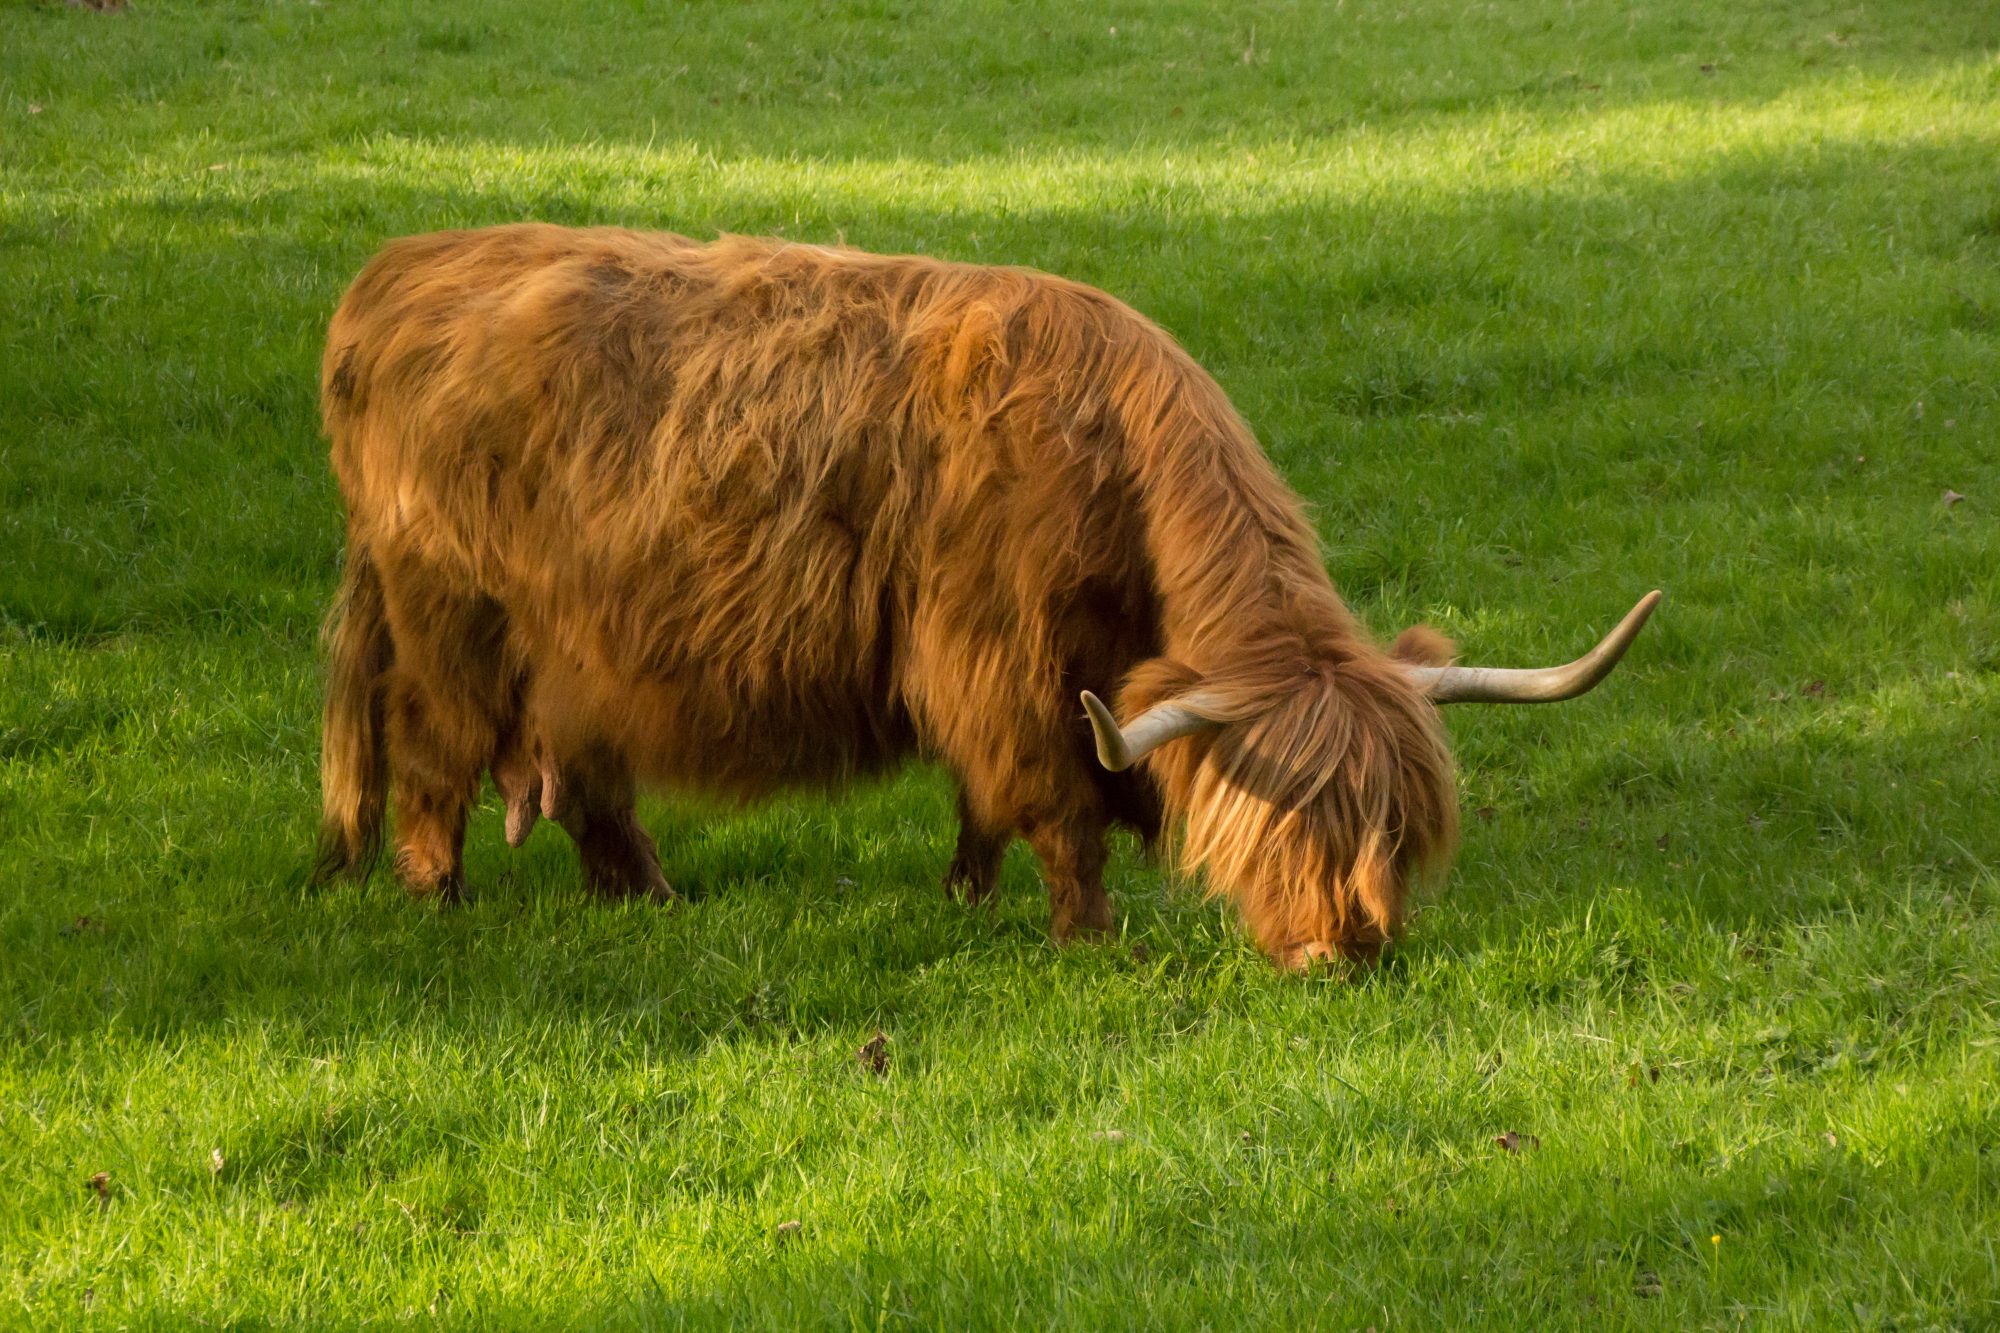 Brown highland cow in grassy field